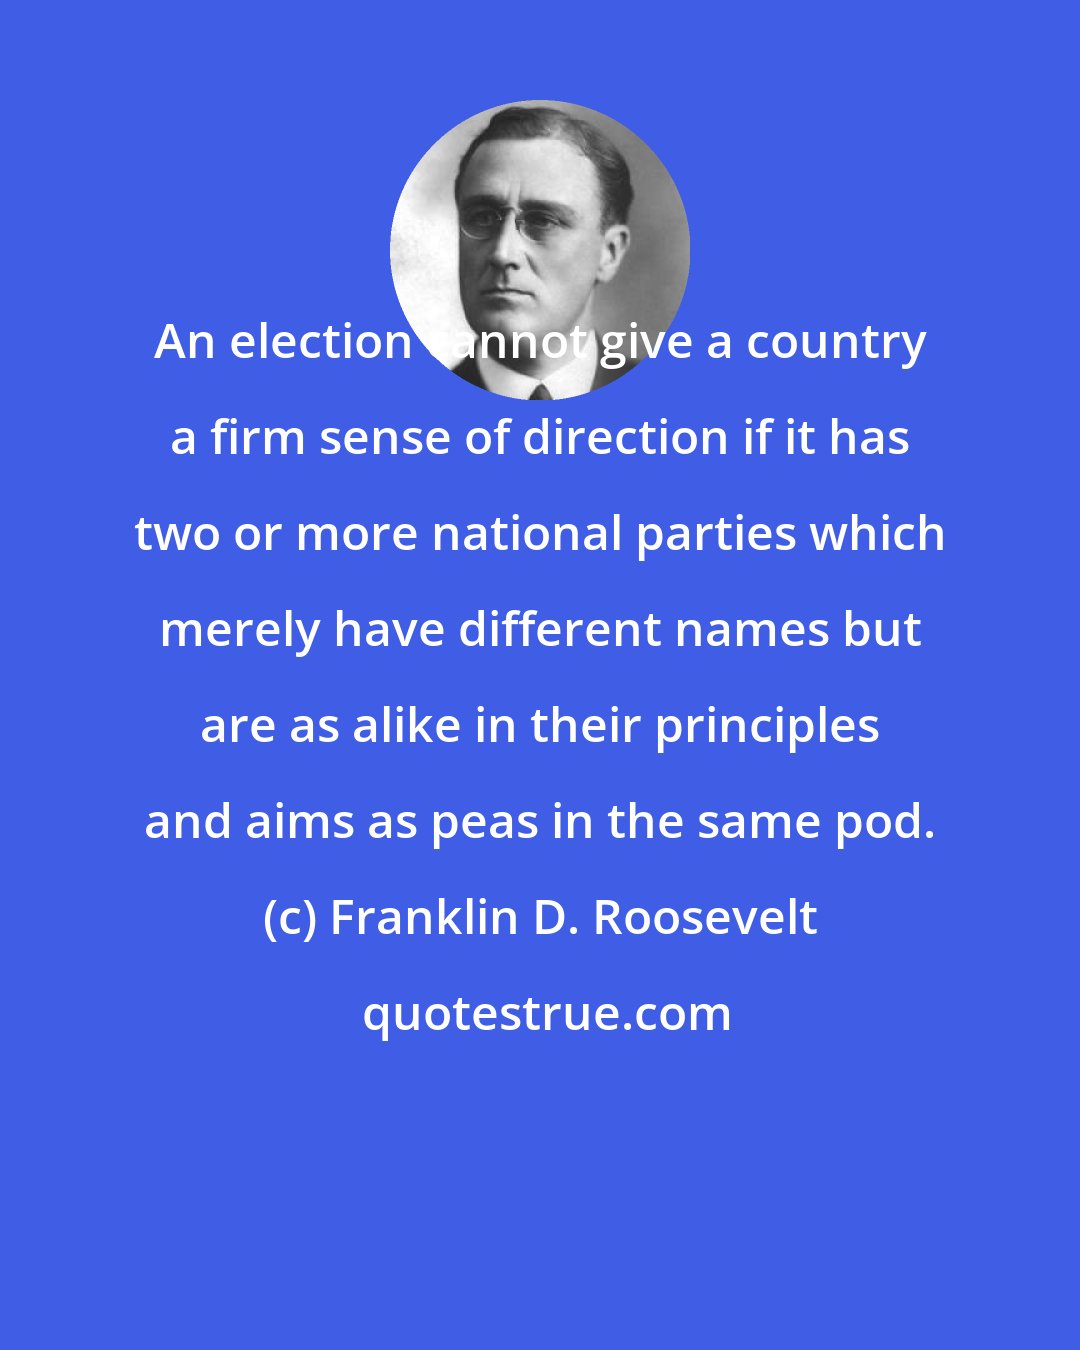 Franklin D. Roosevelt: An election cannot give a country a firm sense of direction if it has two or more national parties which merely have different names but are as alike in their principles and aims as peas in the same pod.